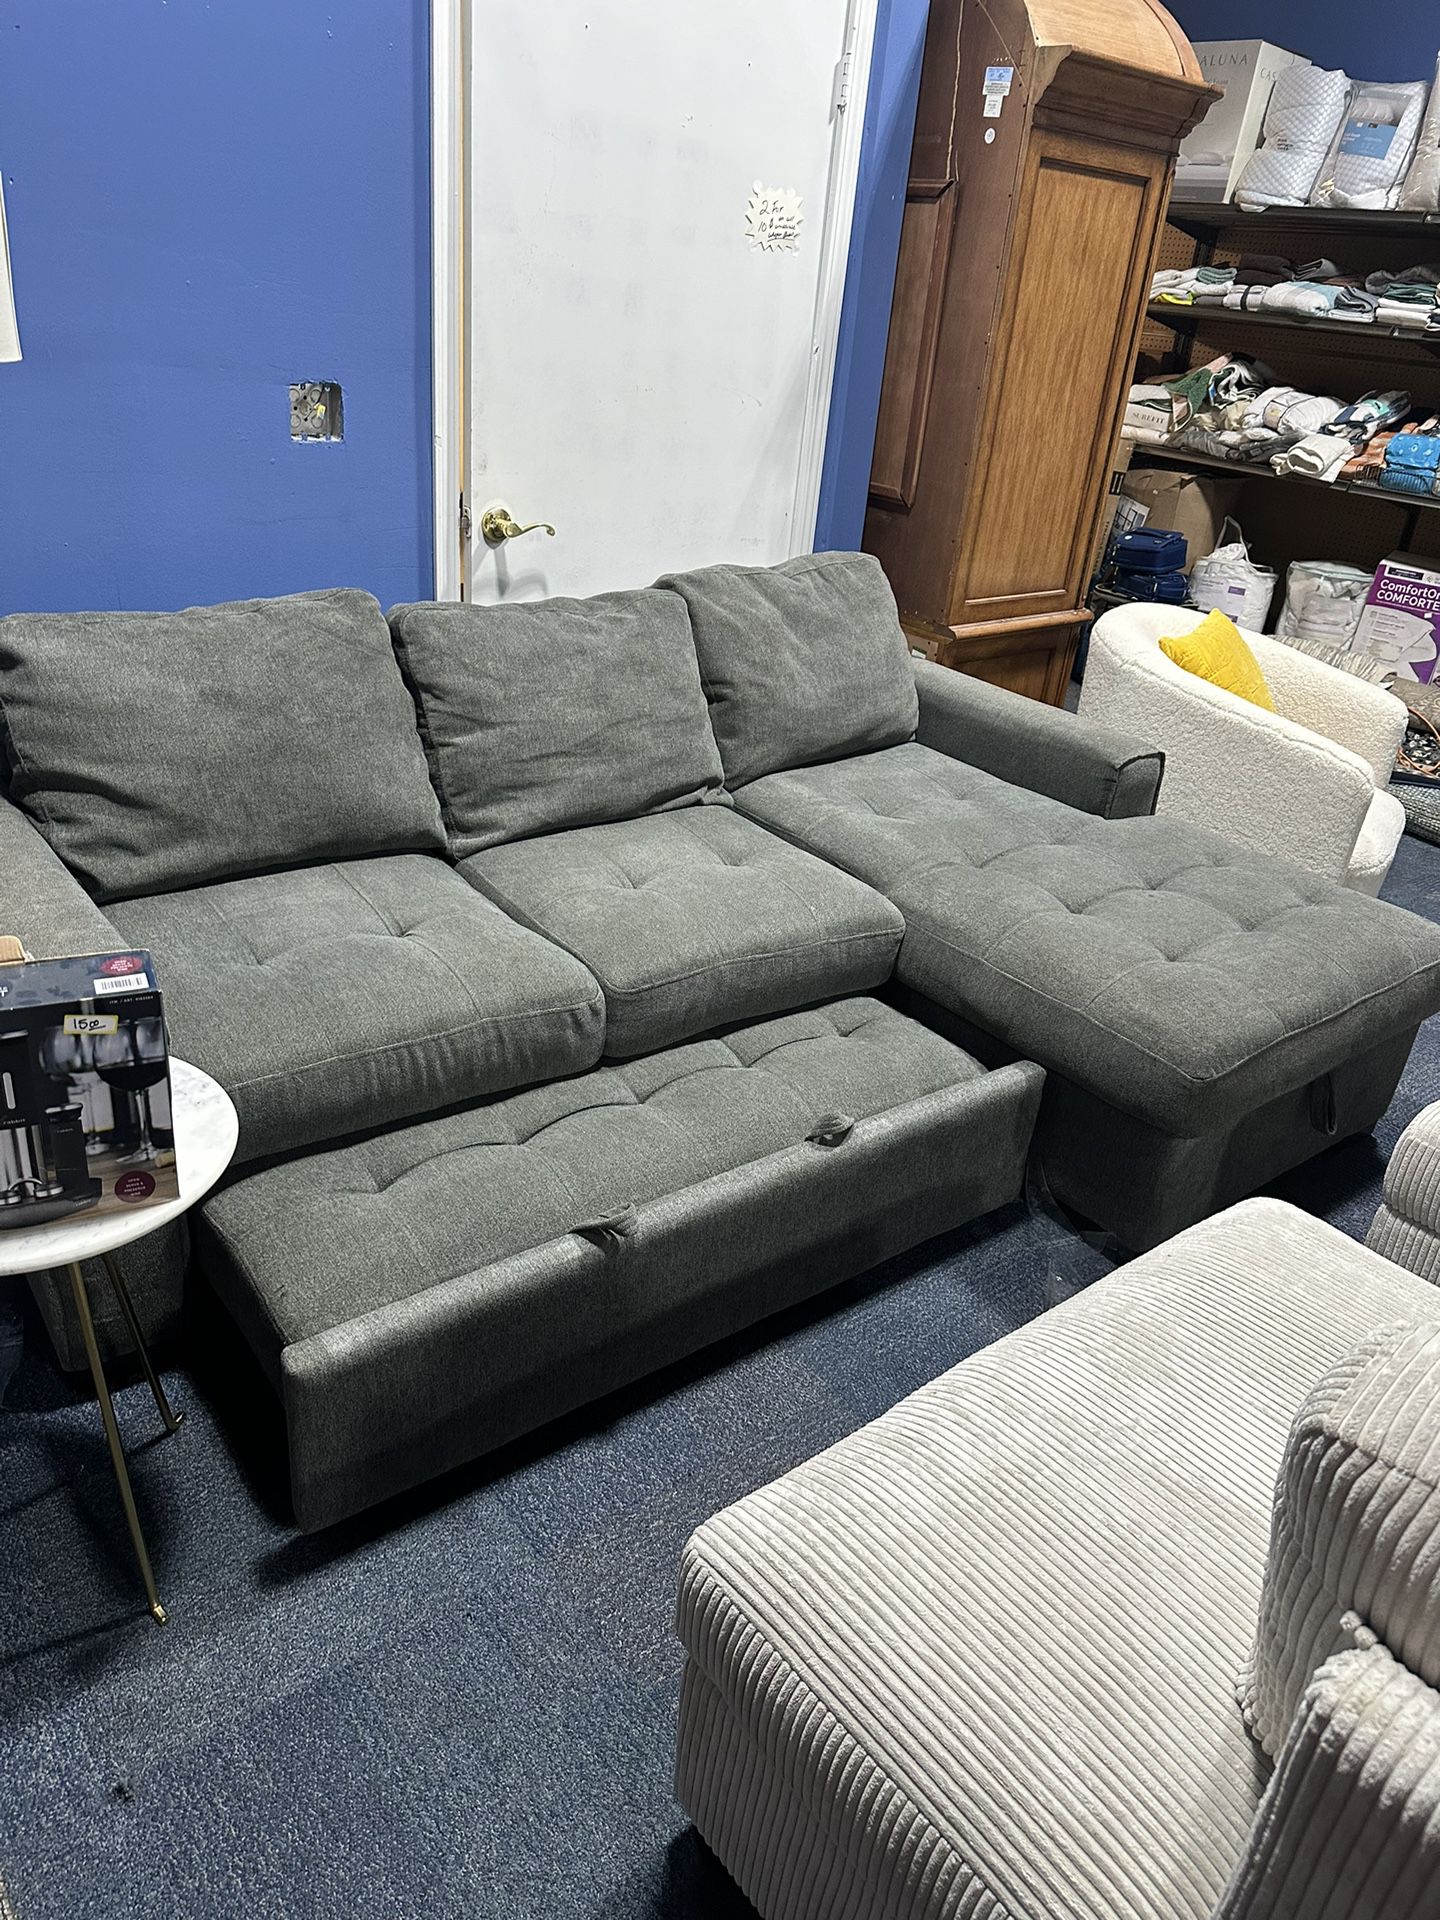 Sofa Bed With Chaise And Storage 